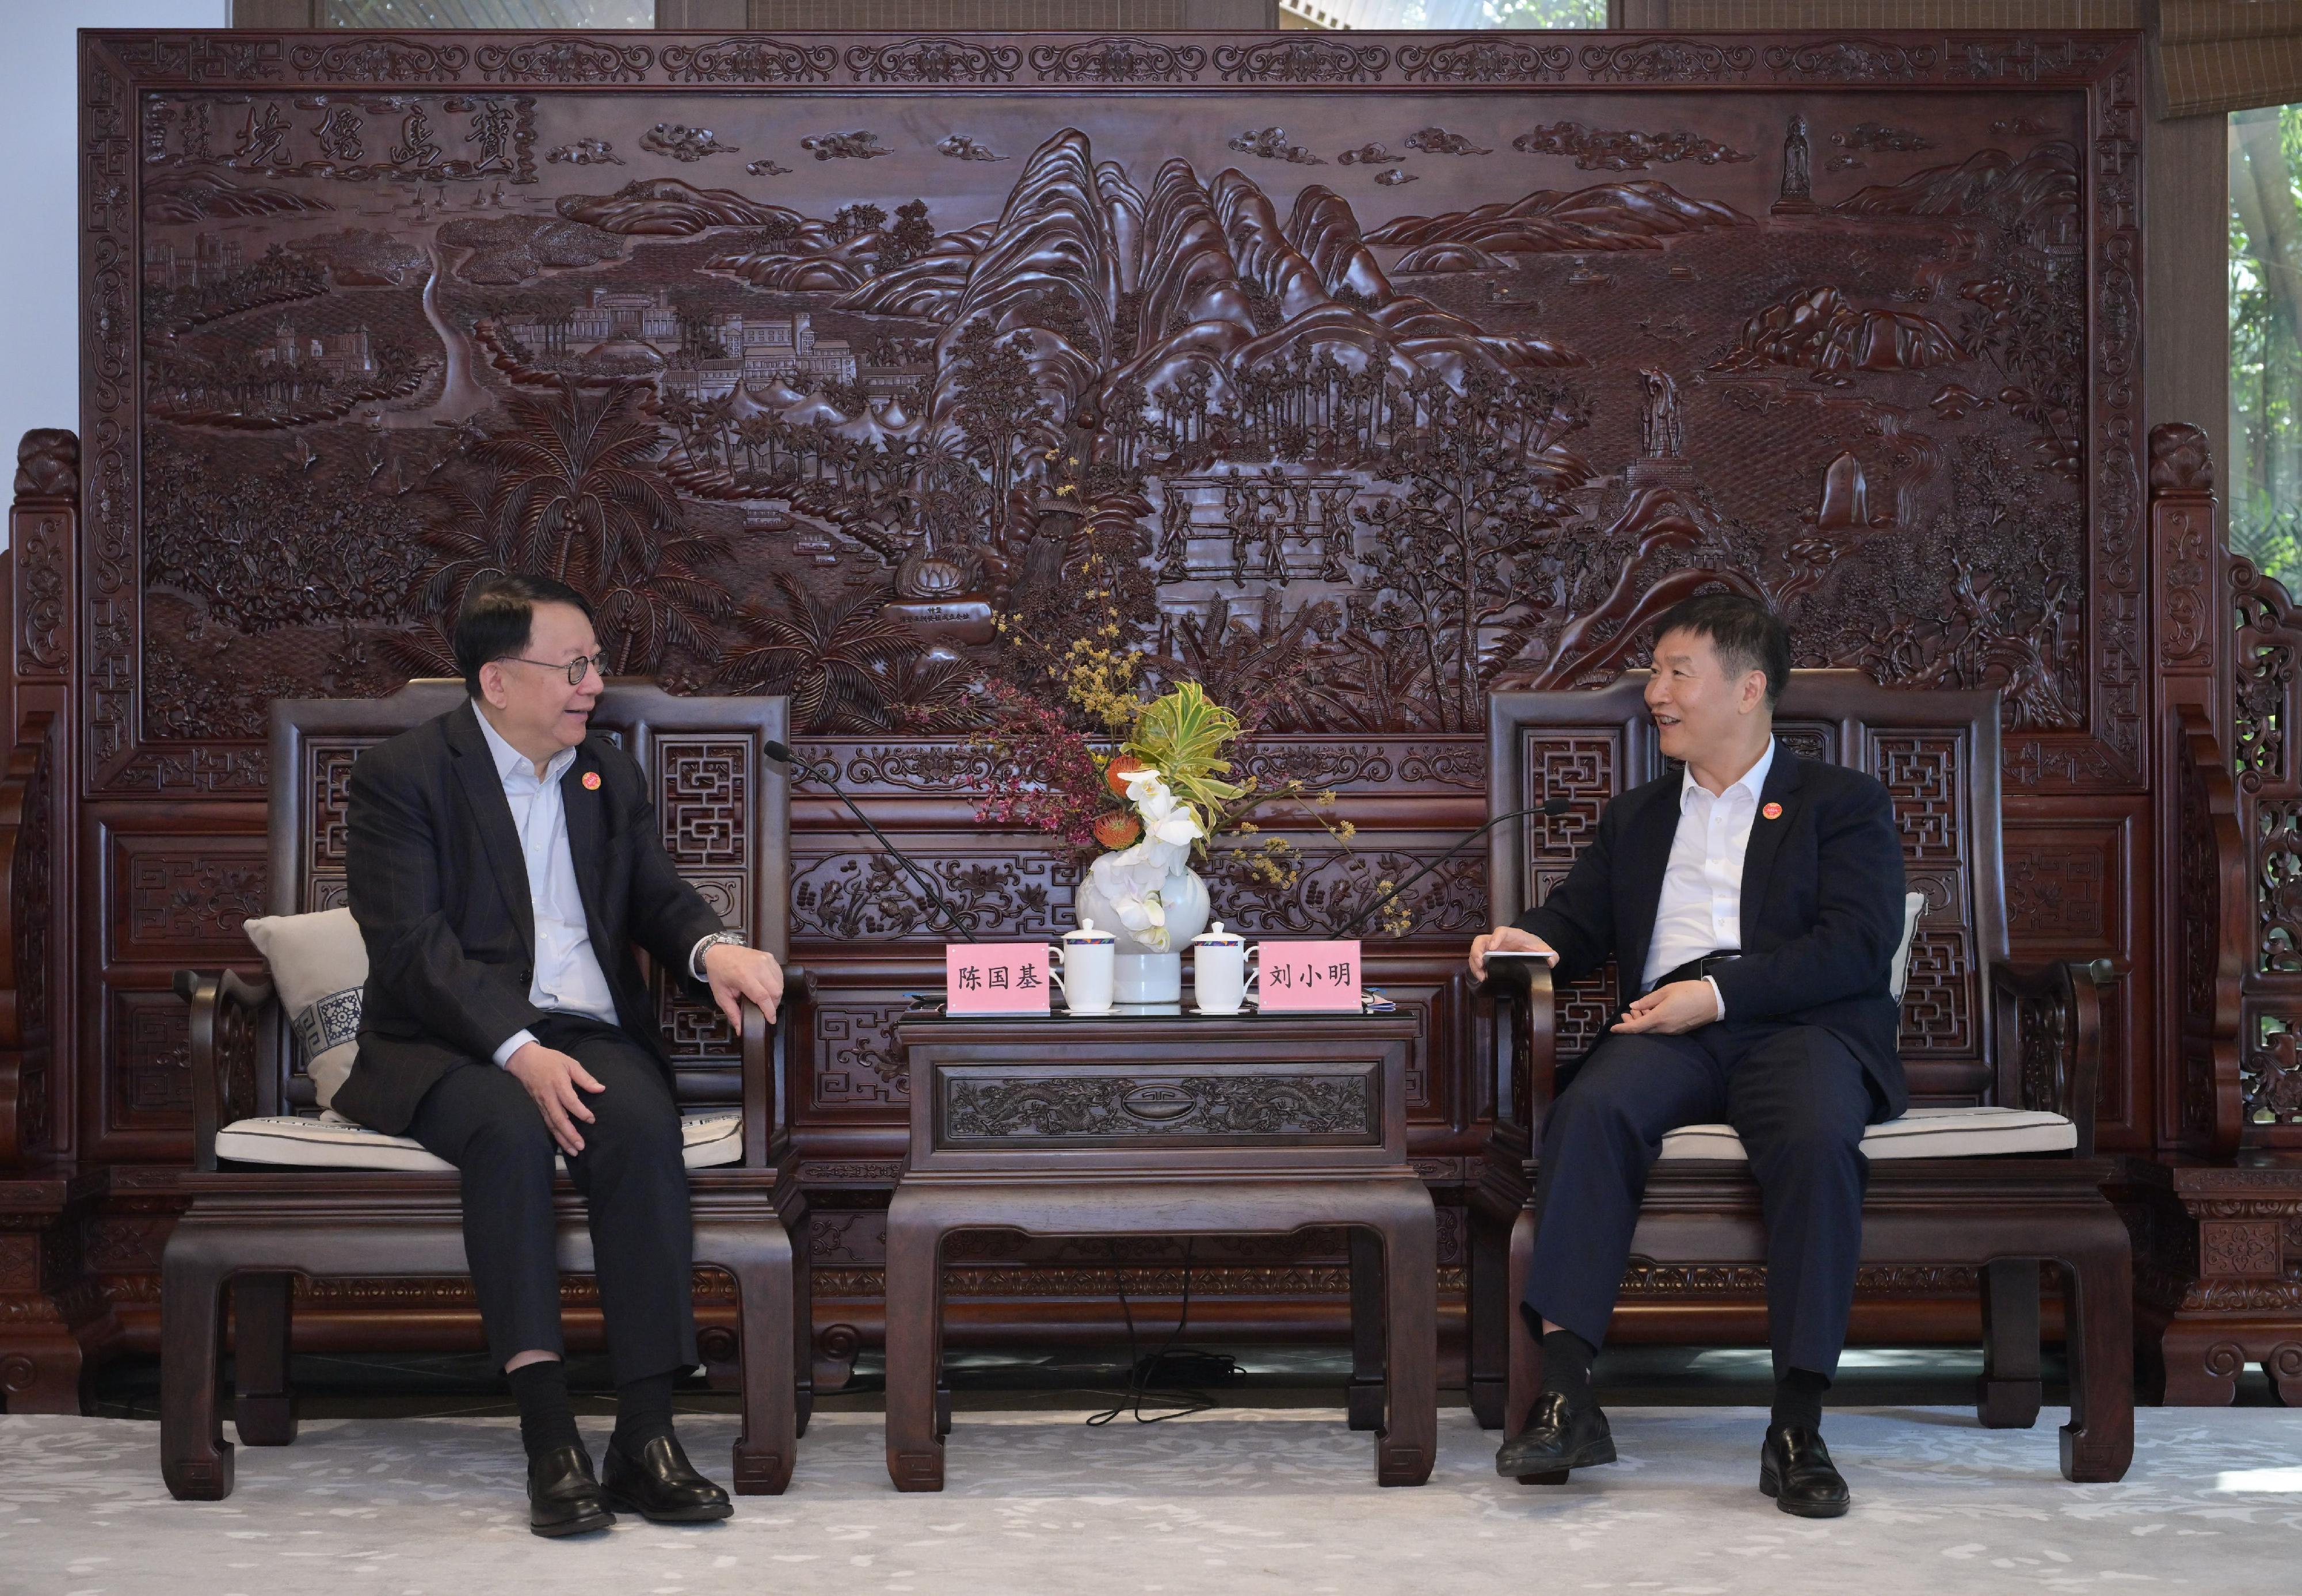 The Chief Secretary for Administration, Mr Chan Kwok-ki (left), meets with the Governor of Hainan Province, Mr Liu Xiaoming (right) in Hainan today (March 27).